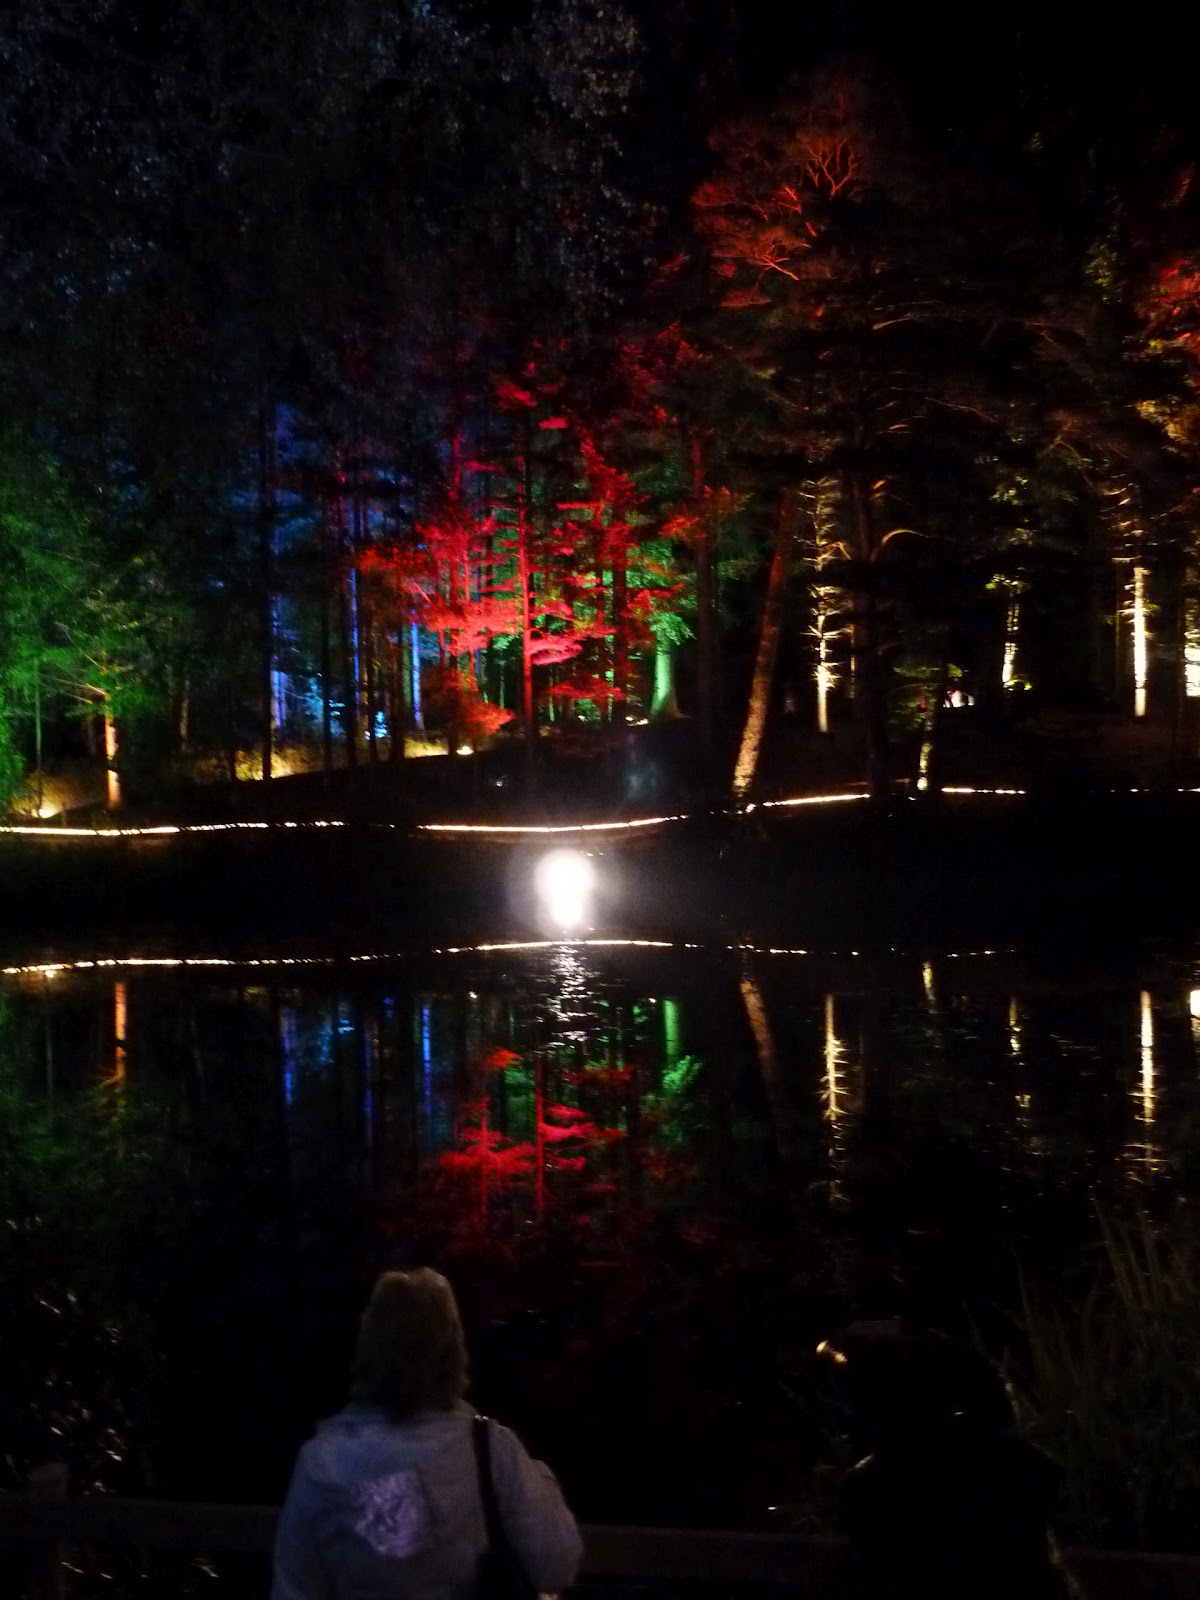 Enchanted Forest, Faskally, Pitlochry